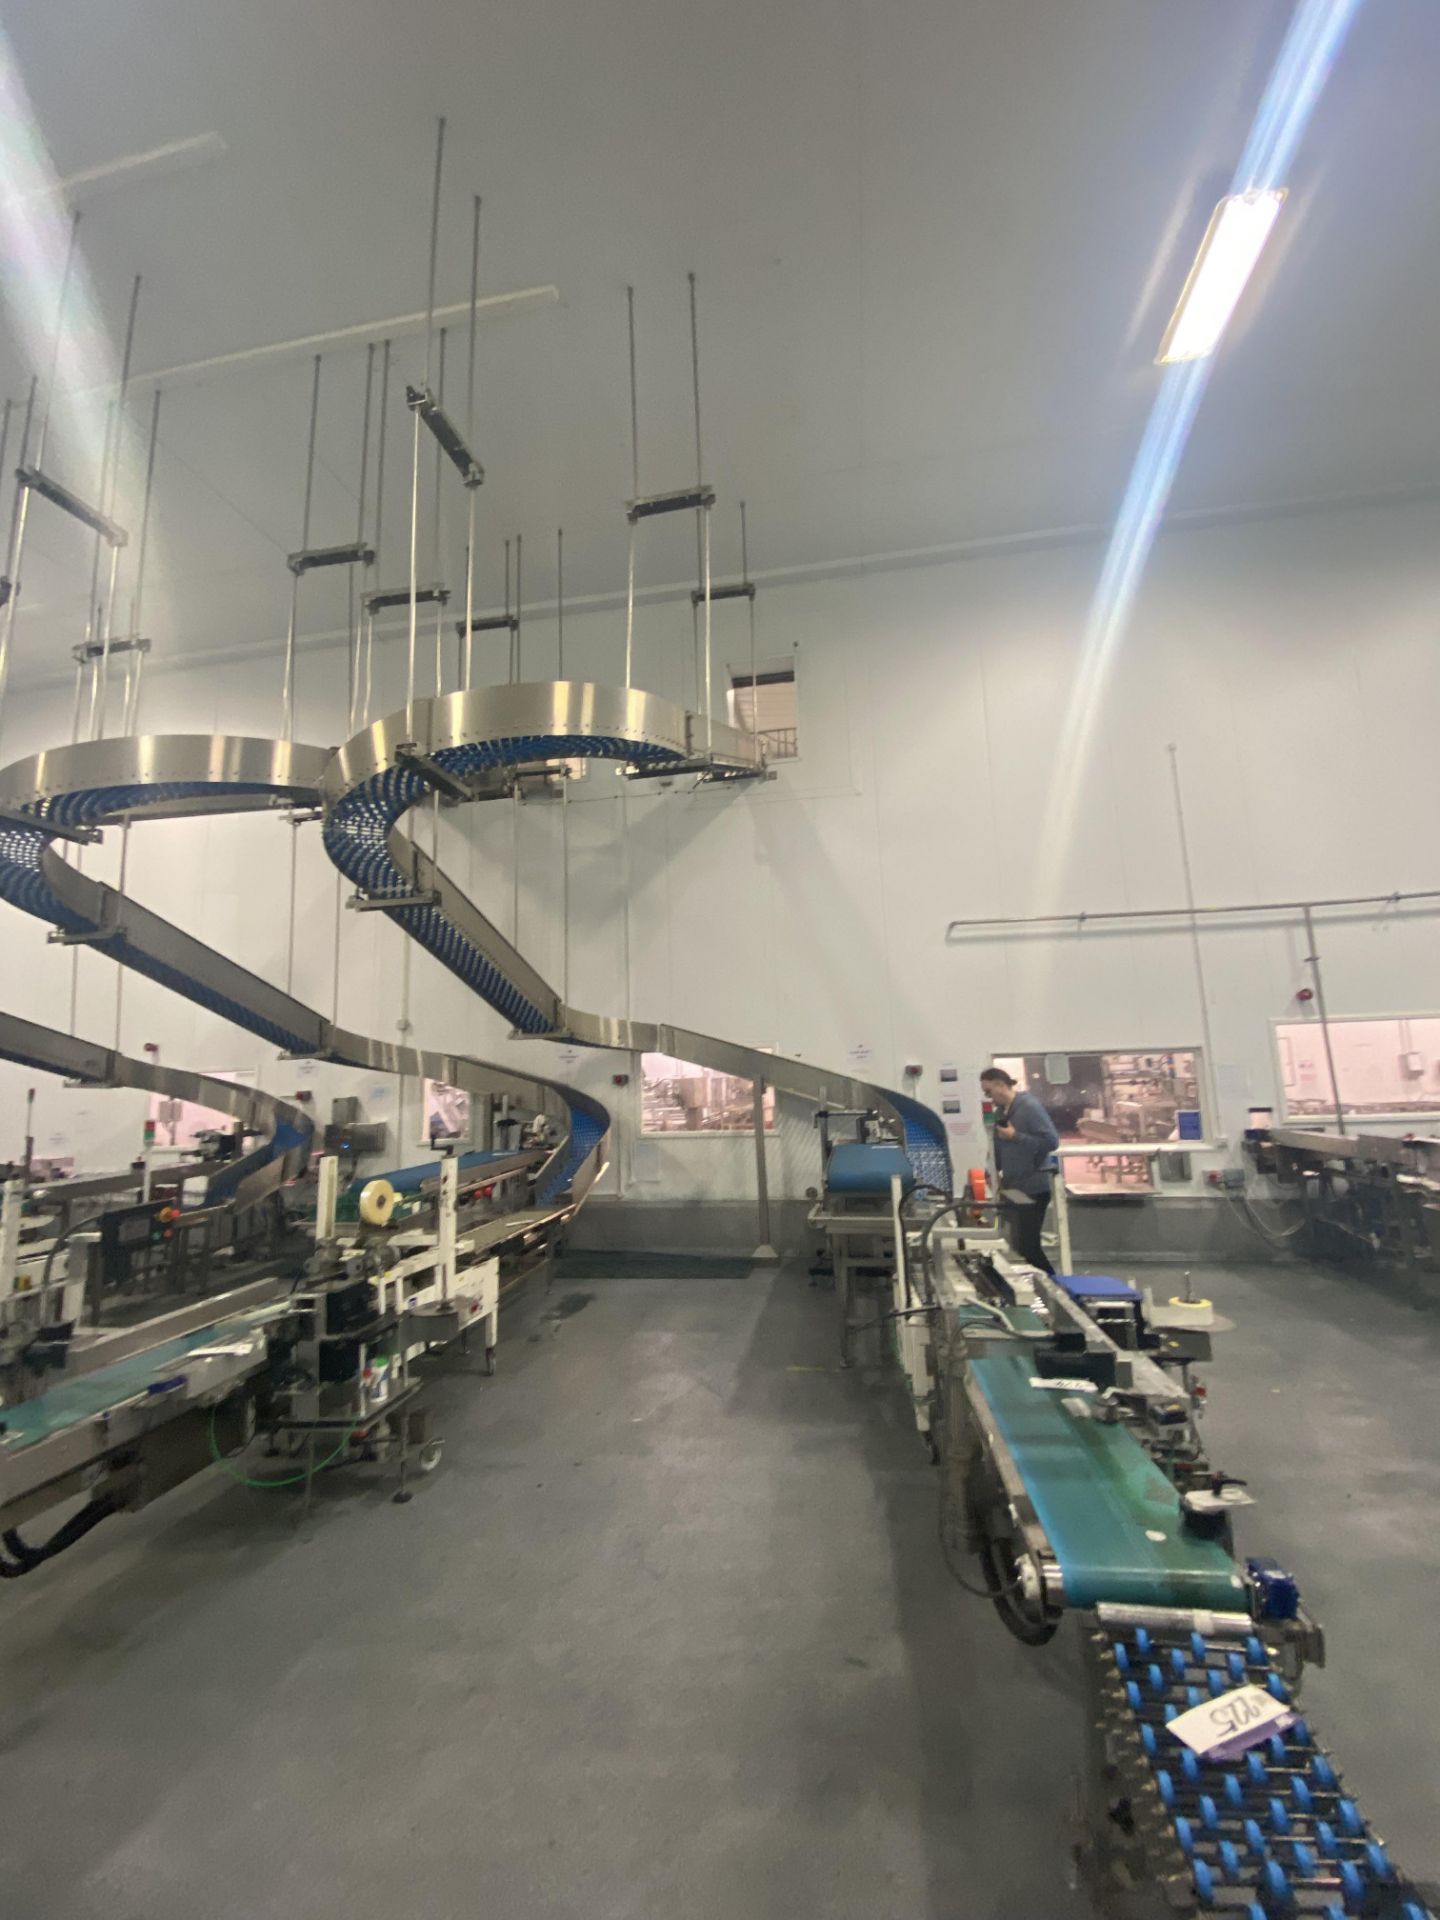 Stainless Steel Suspended Spiral Inclined Gravity Roller Conveyor, approx. 2.75m x 3.75m - Image 3 of 3